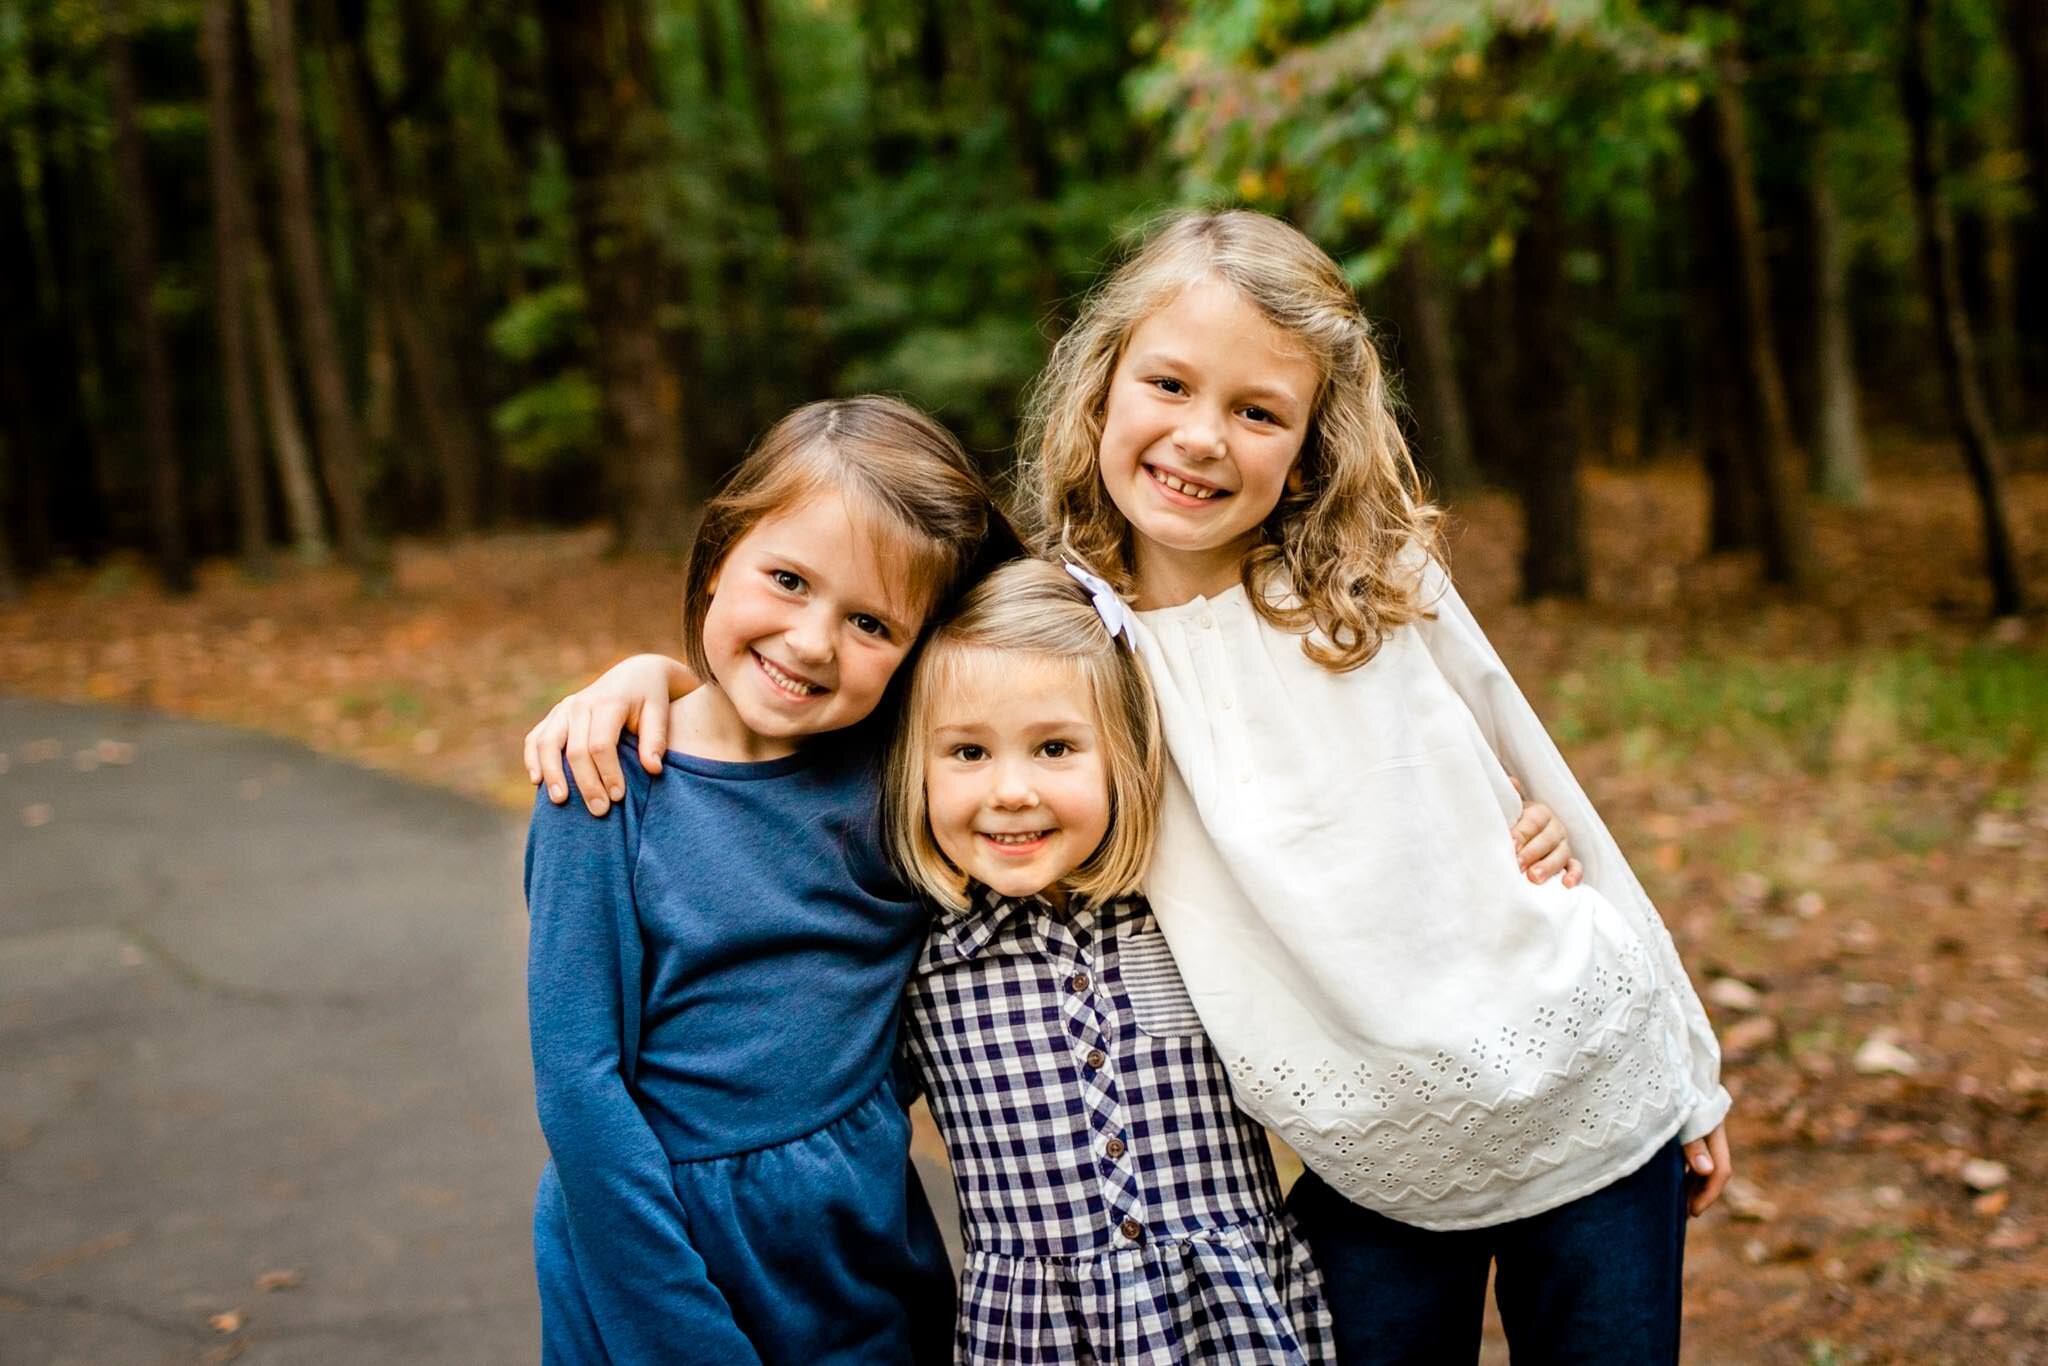 Raleigh Family Photographer | Umstead Park | By G. Lin Photography | Sibling portrait of three young girls